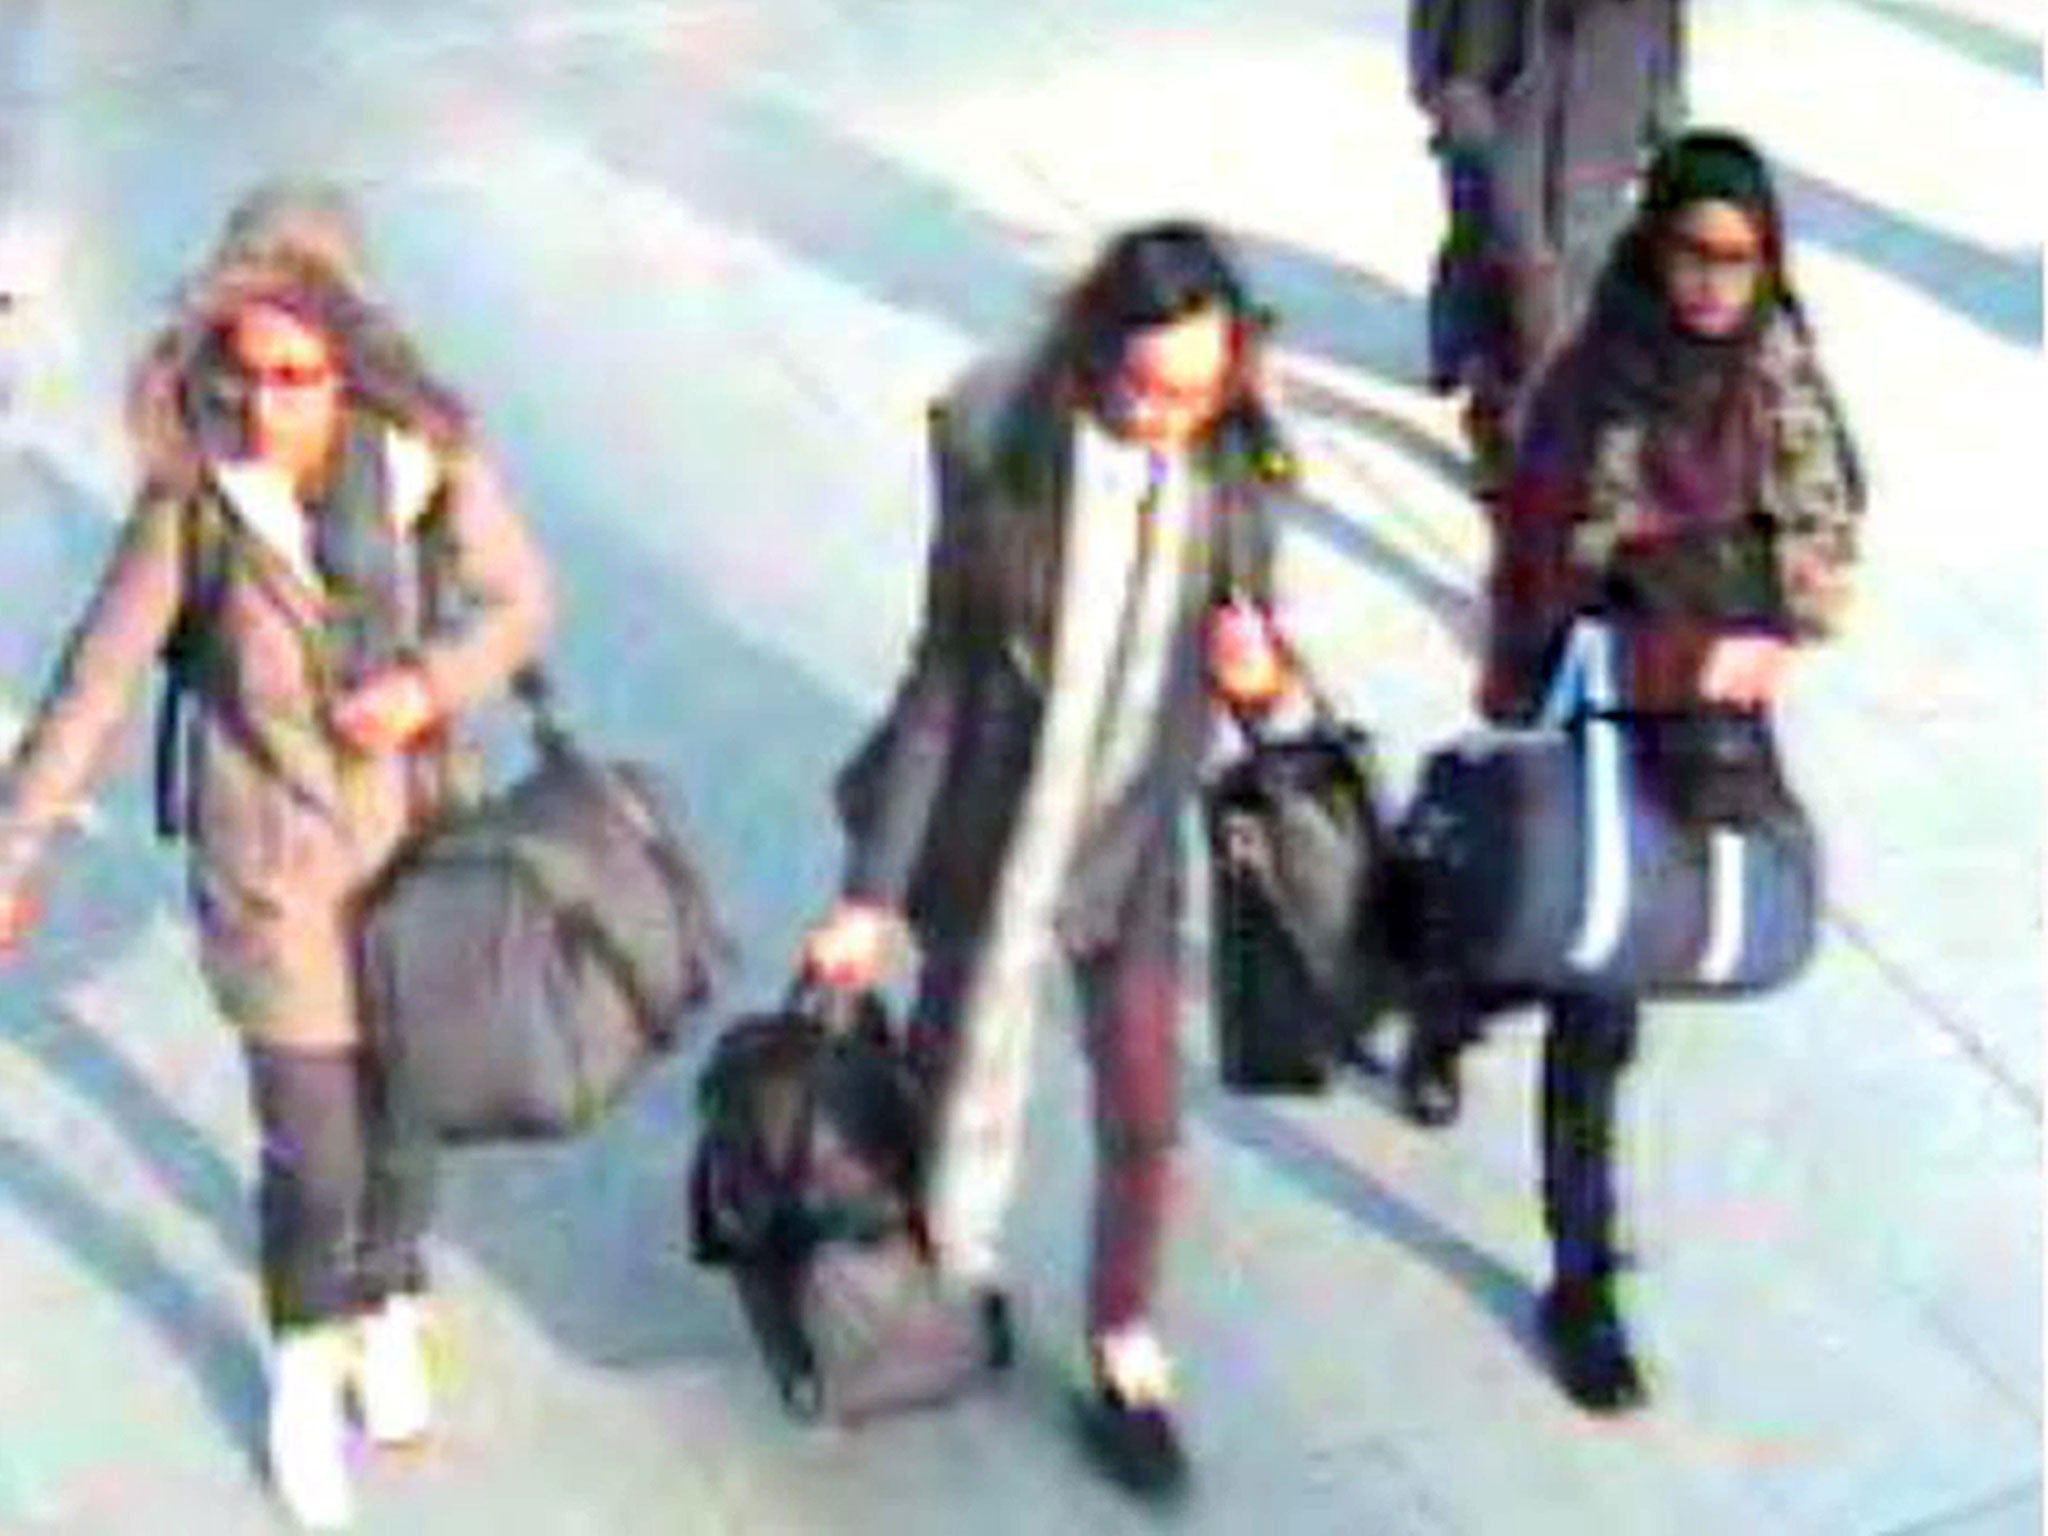 A security camera catches three British teenage girls who left their families to join extremists in Syria